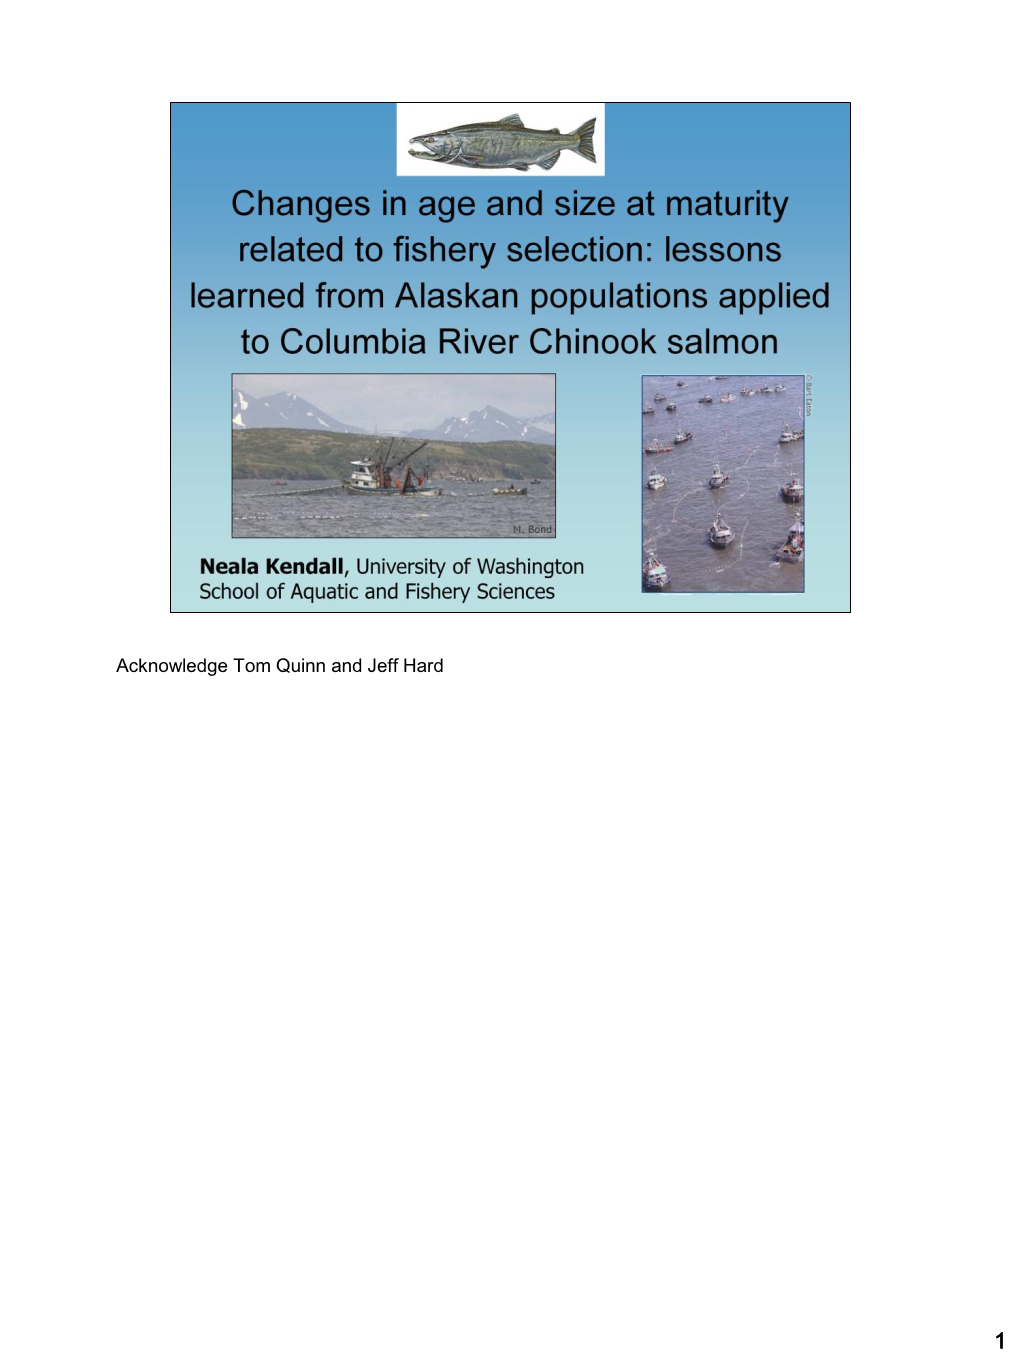 Fishery Selection on Length and Age at Maturity of Sockeye Salmon in The